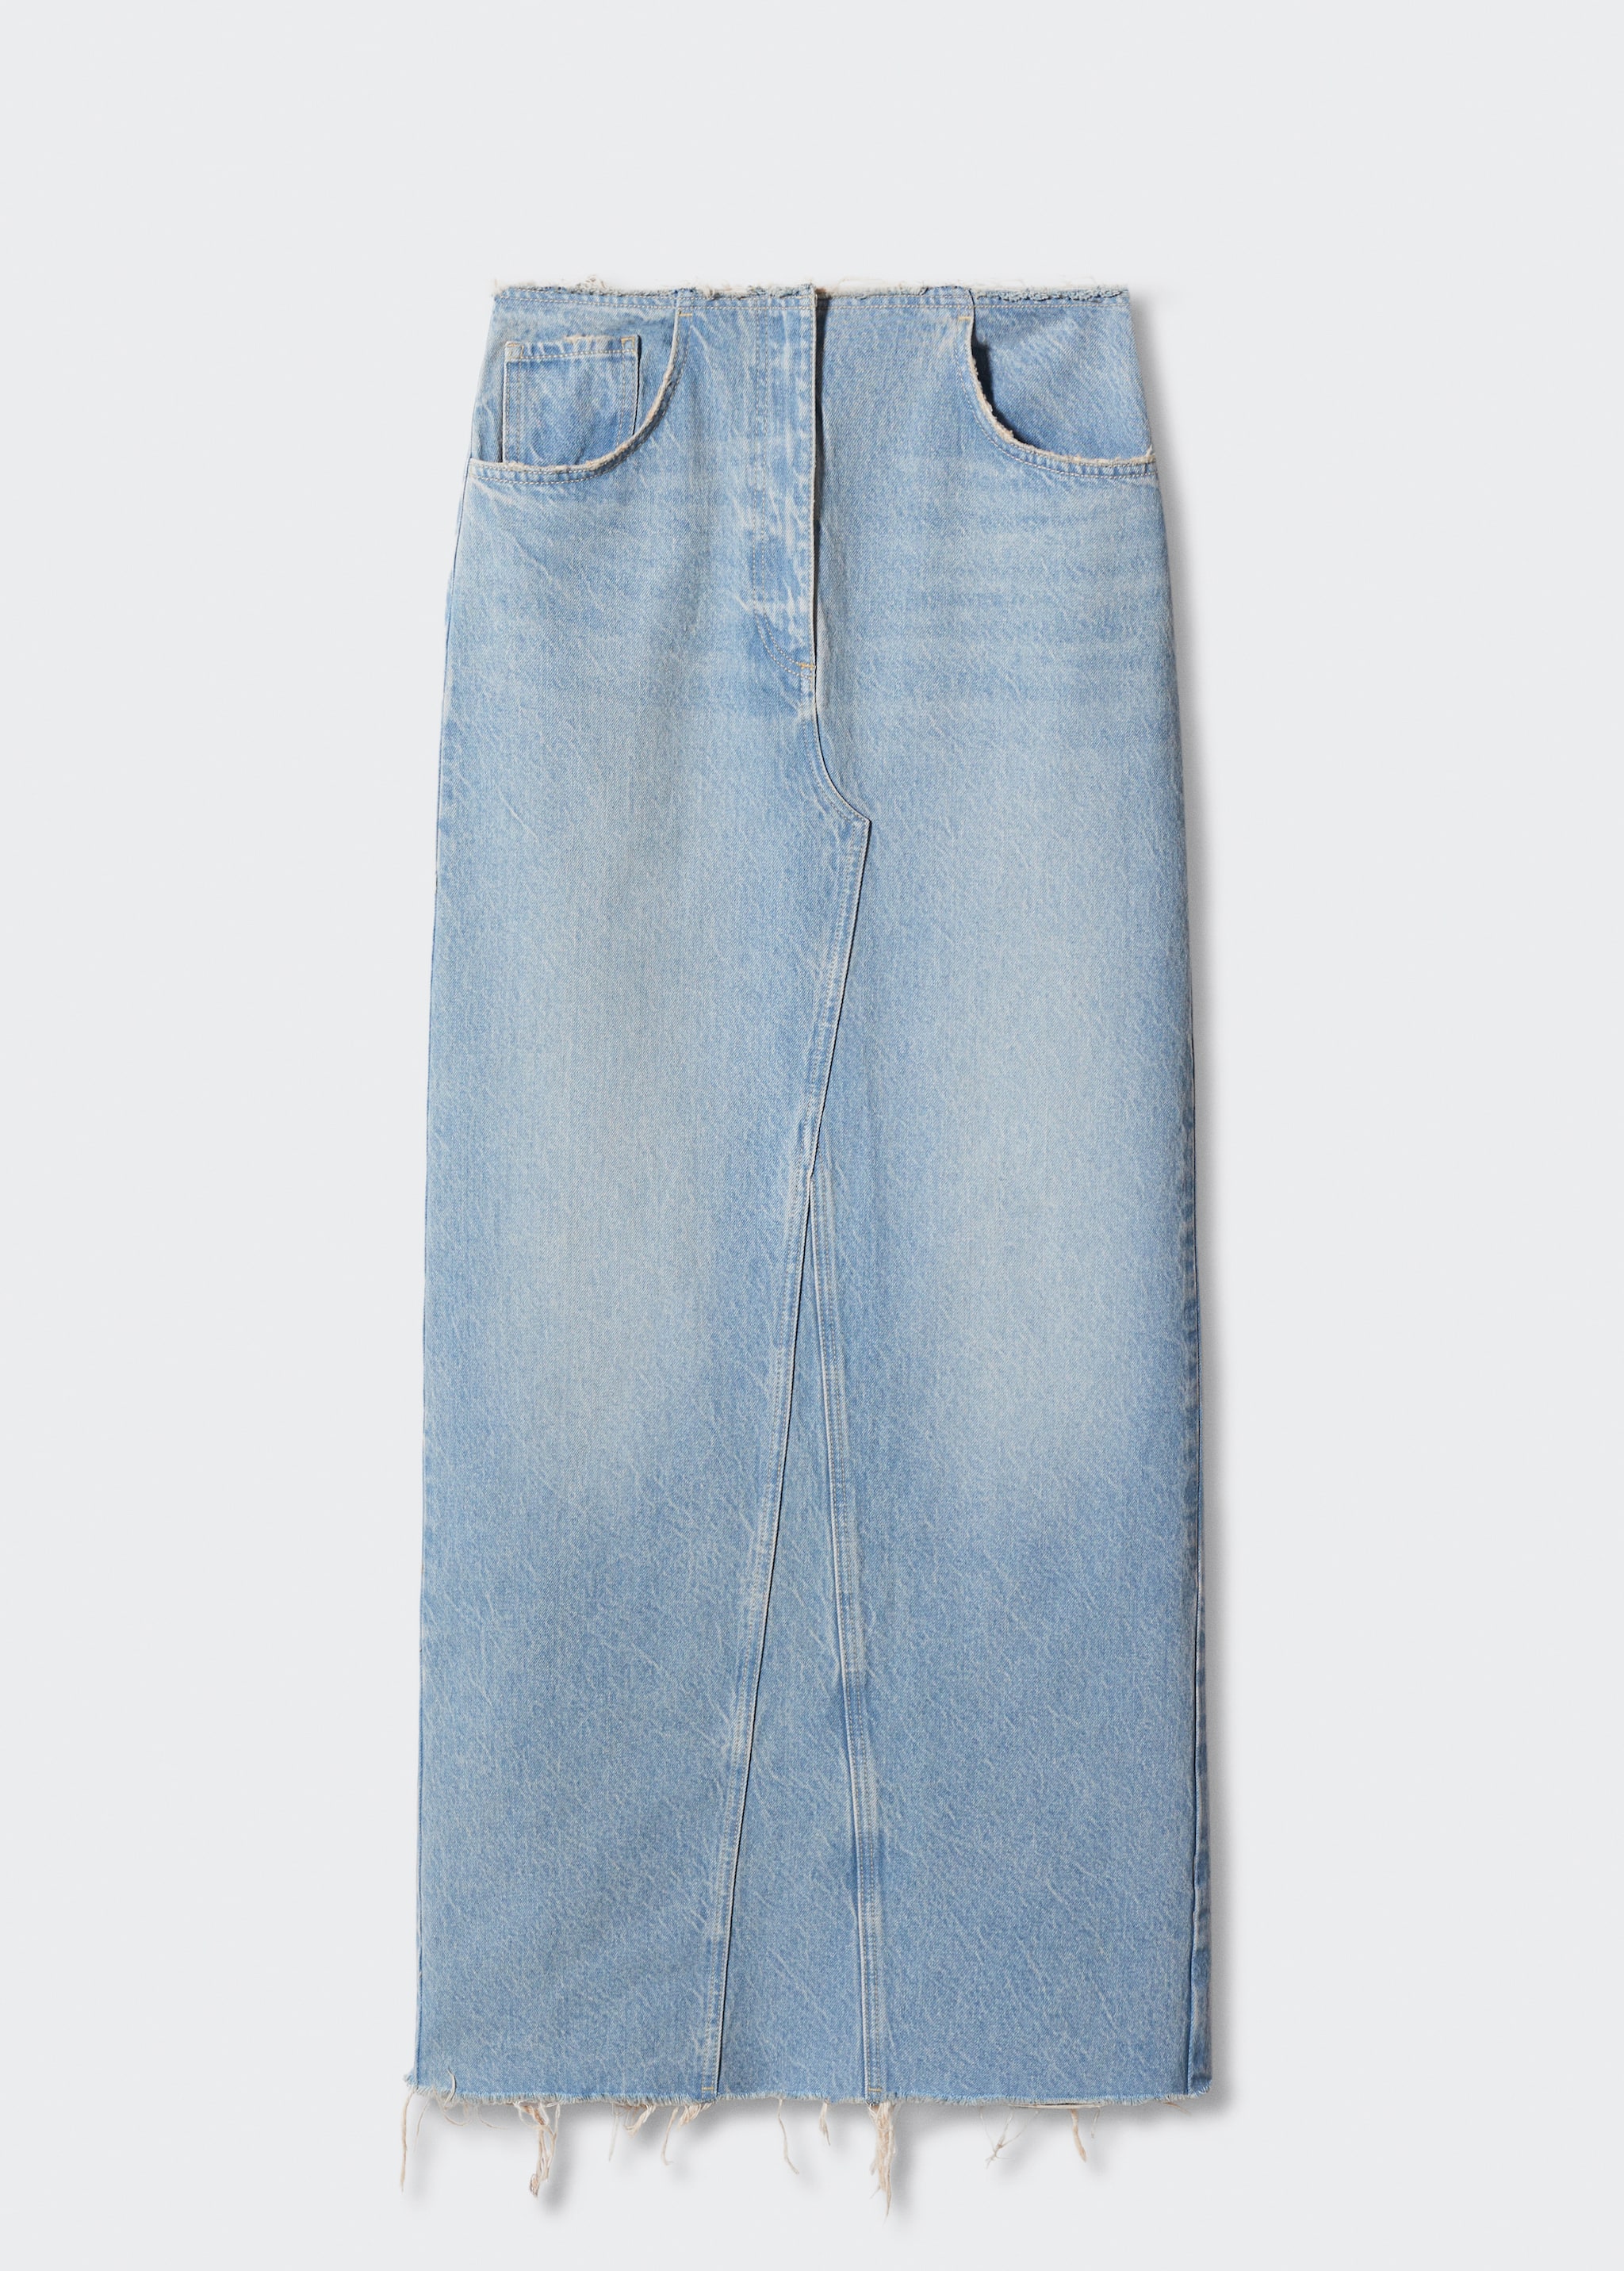 Denim long skirt - Article without model